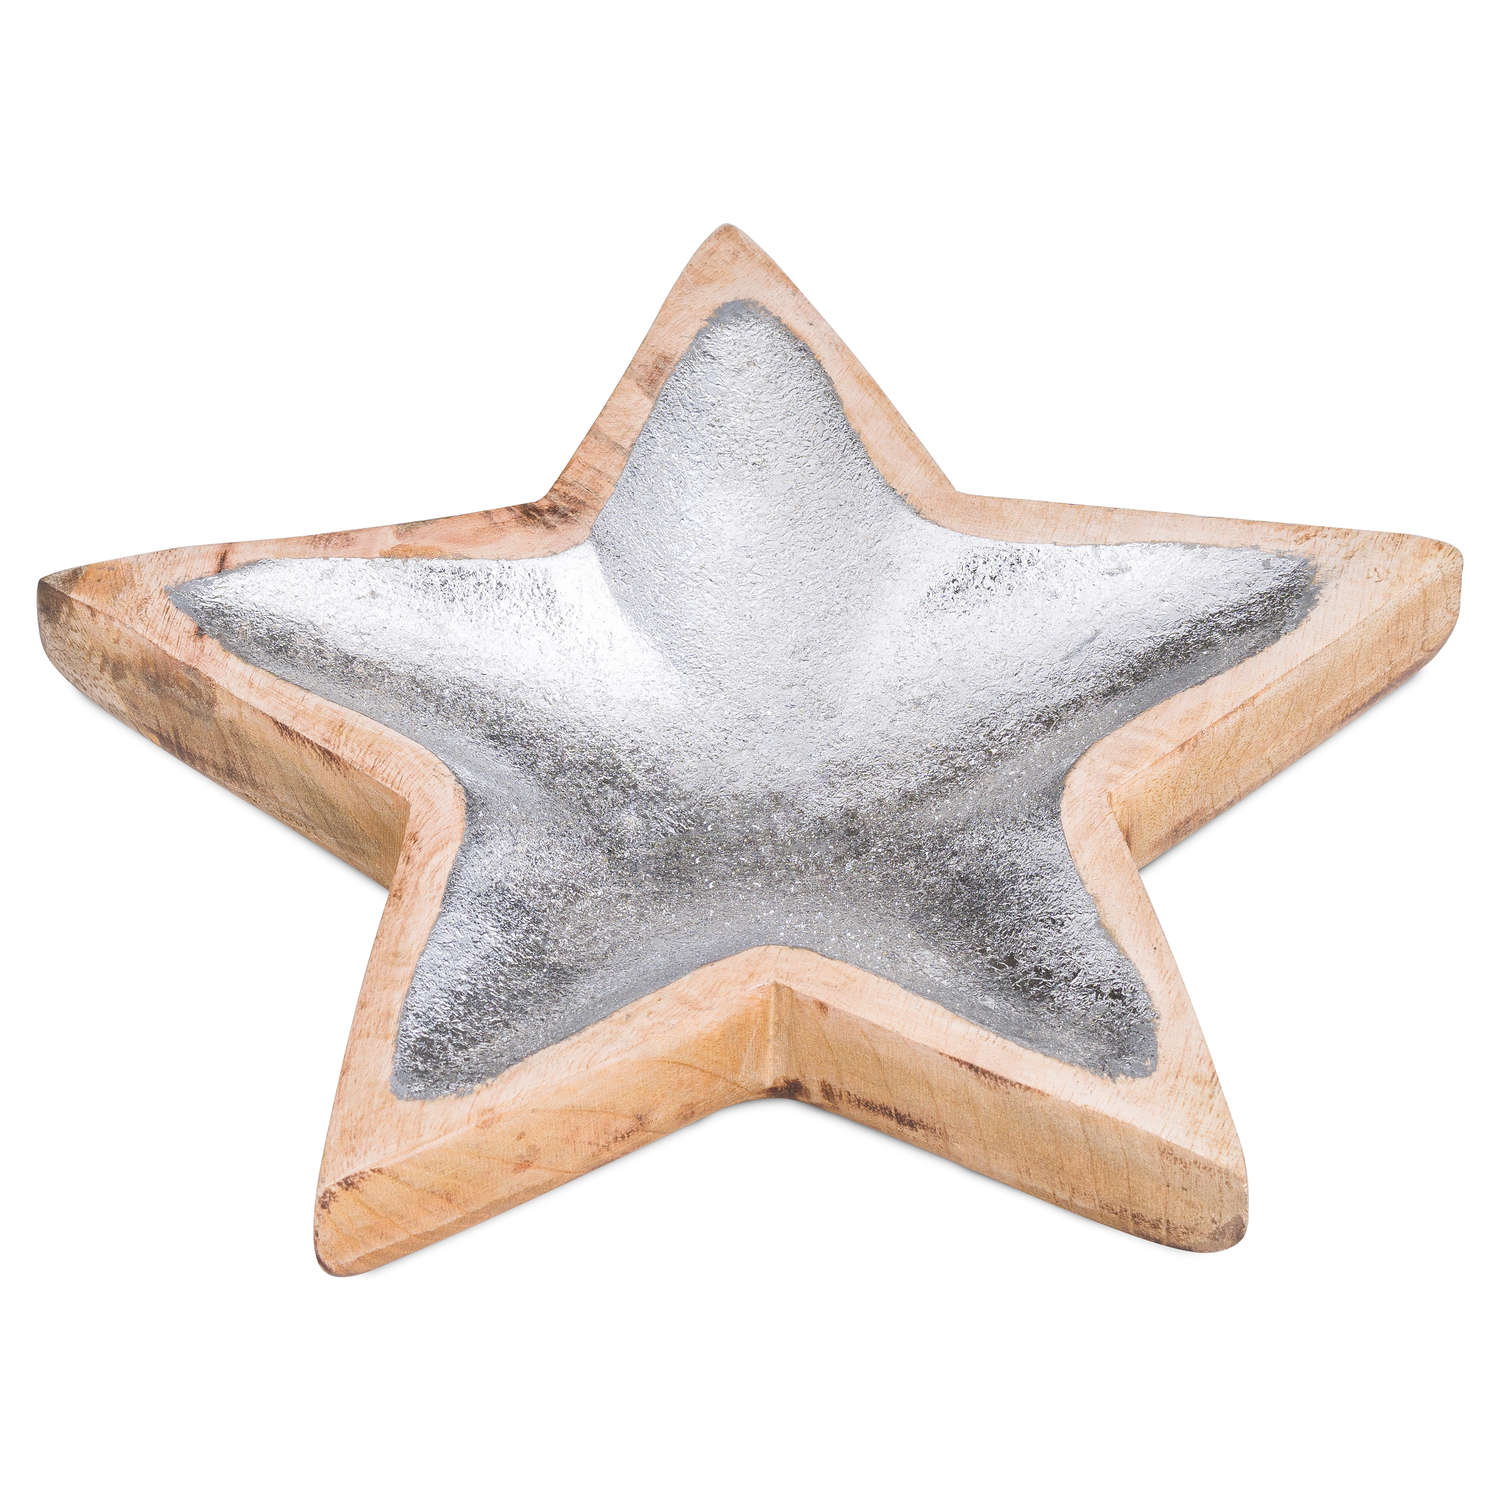 Wooden Star Dish With Metallic Detail